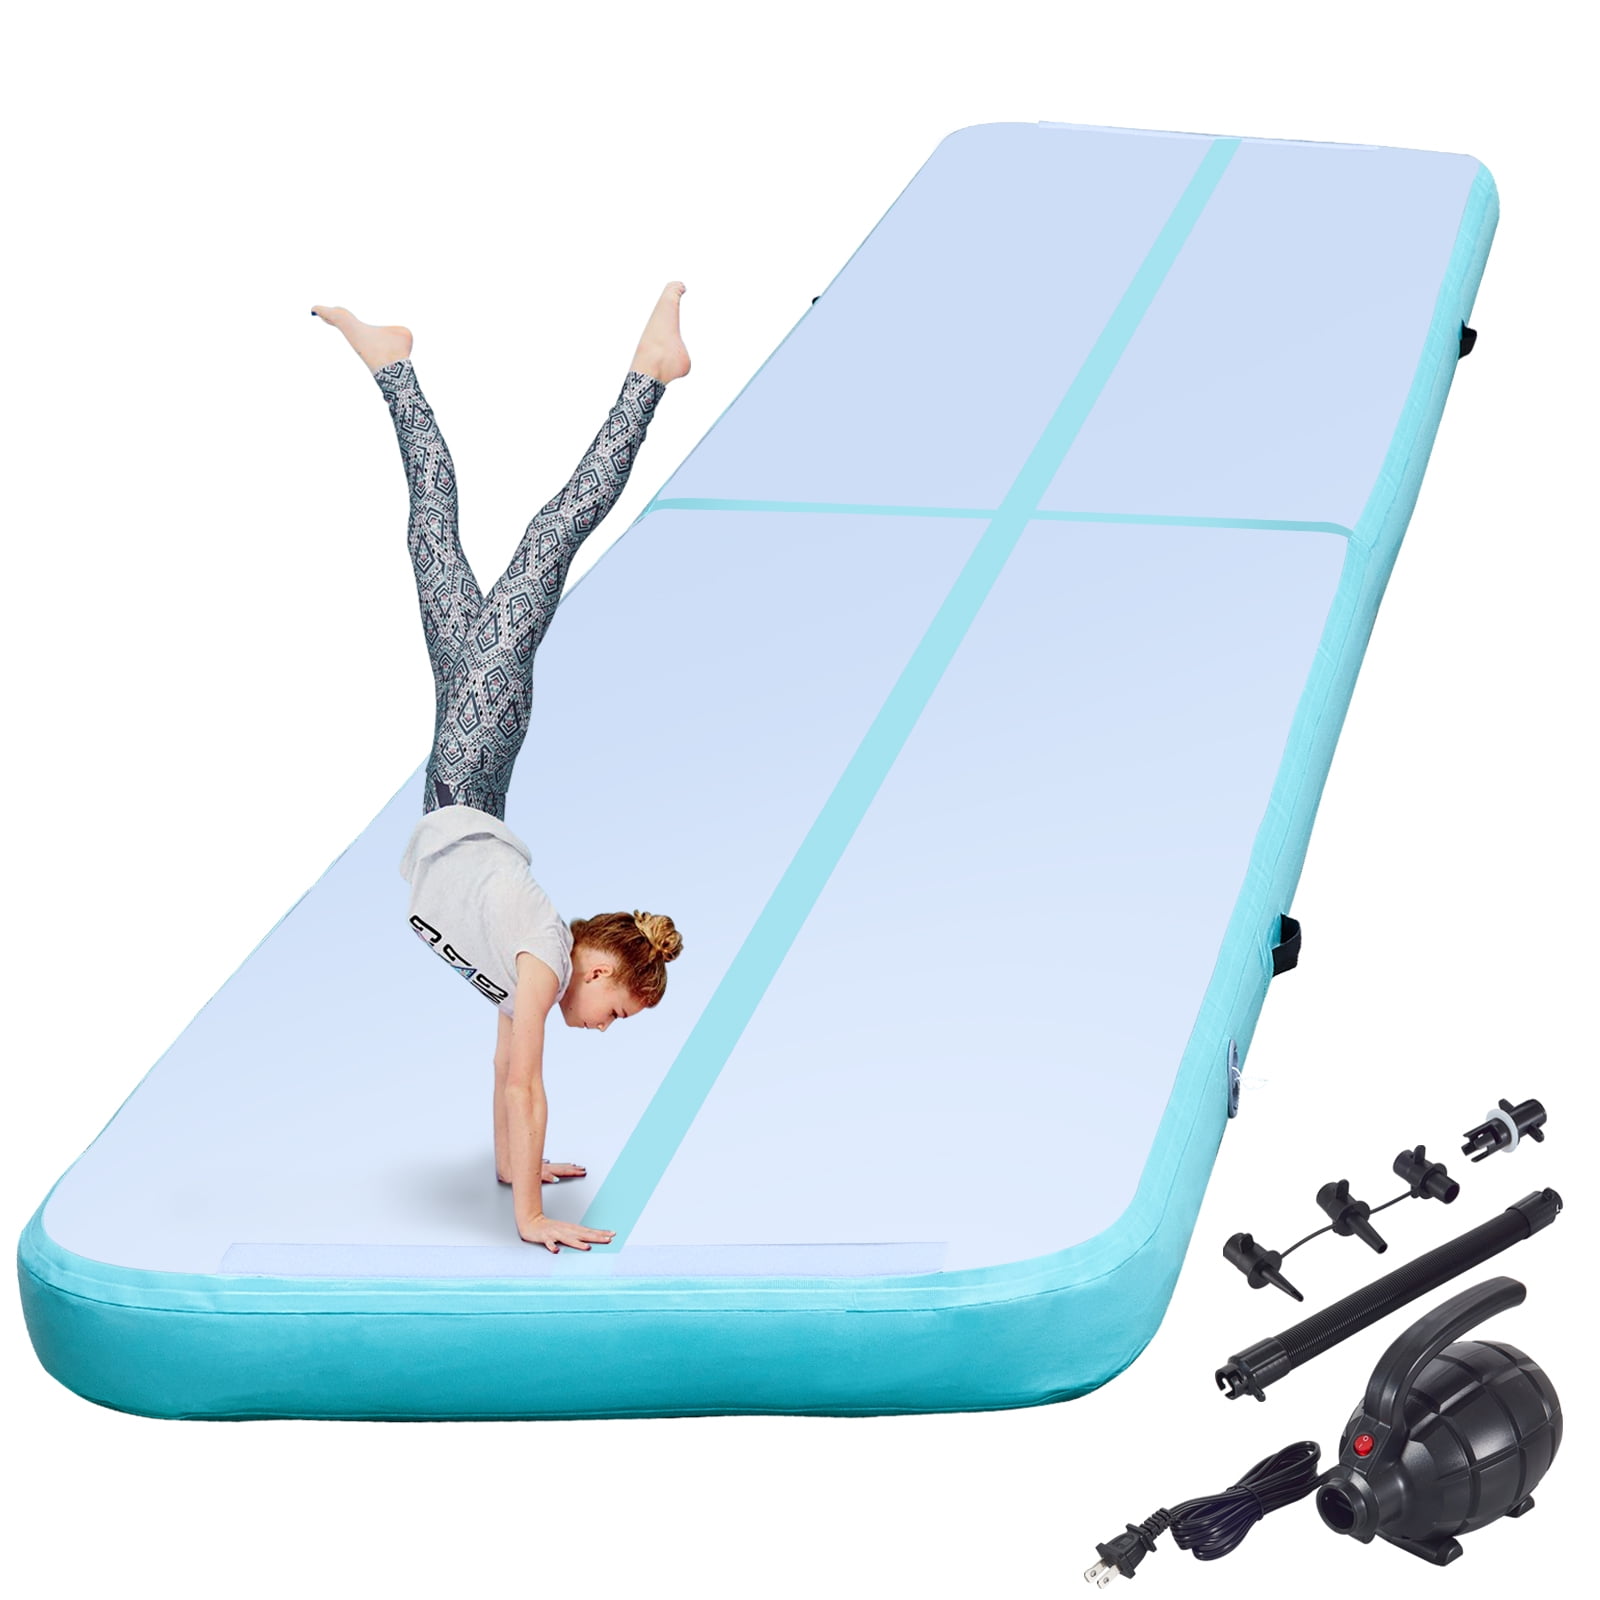 tellen Feodaal Dominant VEVOR Air Track, 16ft Inflatable Air Track Tumbling Mat with Electric Air  Pump, 4in Thickness Tumble Track Mats for Gymnastics/Cheerleading/Yoga/Home  Use, Blue&White - Walmart.com